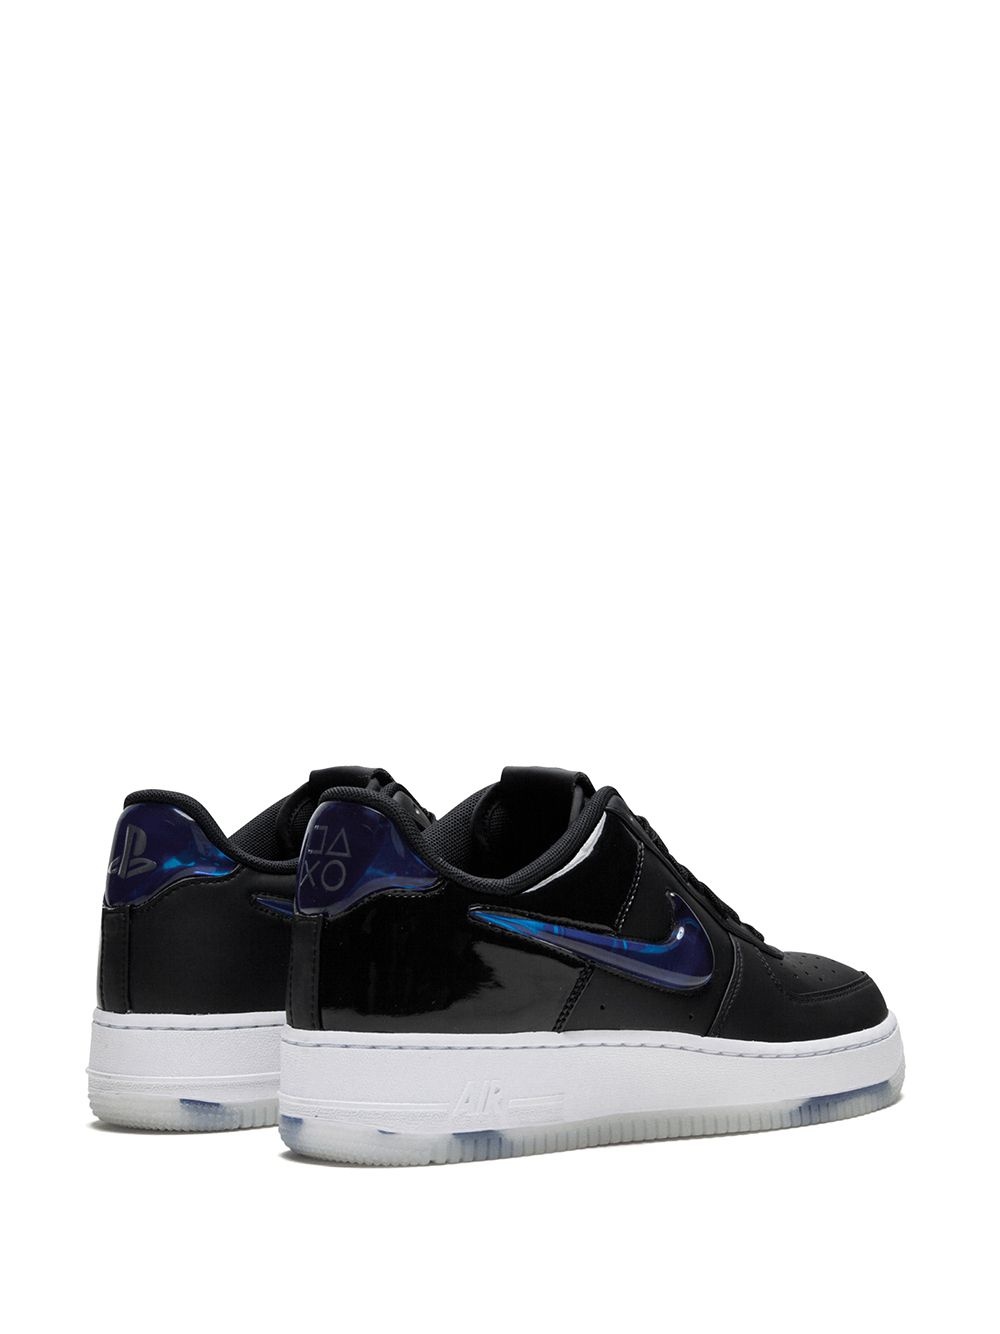 x Playstation Air Force 1 Playstation '18 QS sneakers - 3